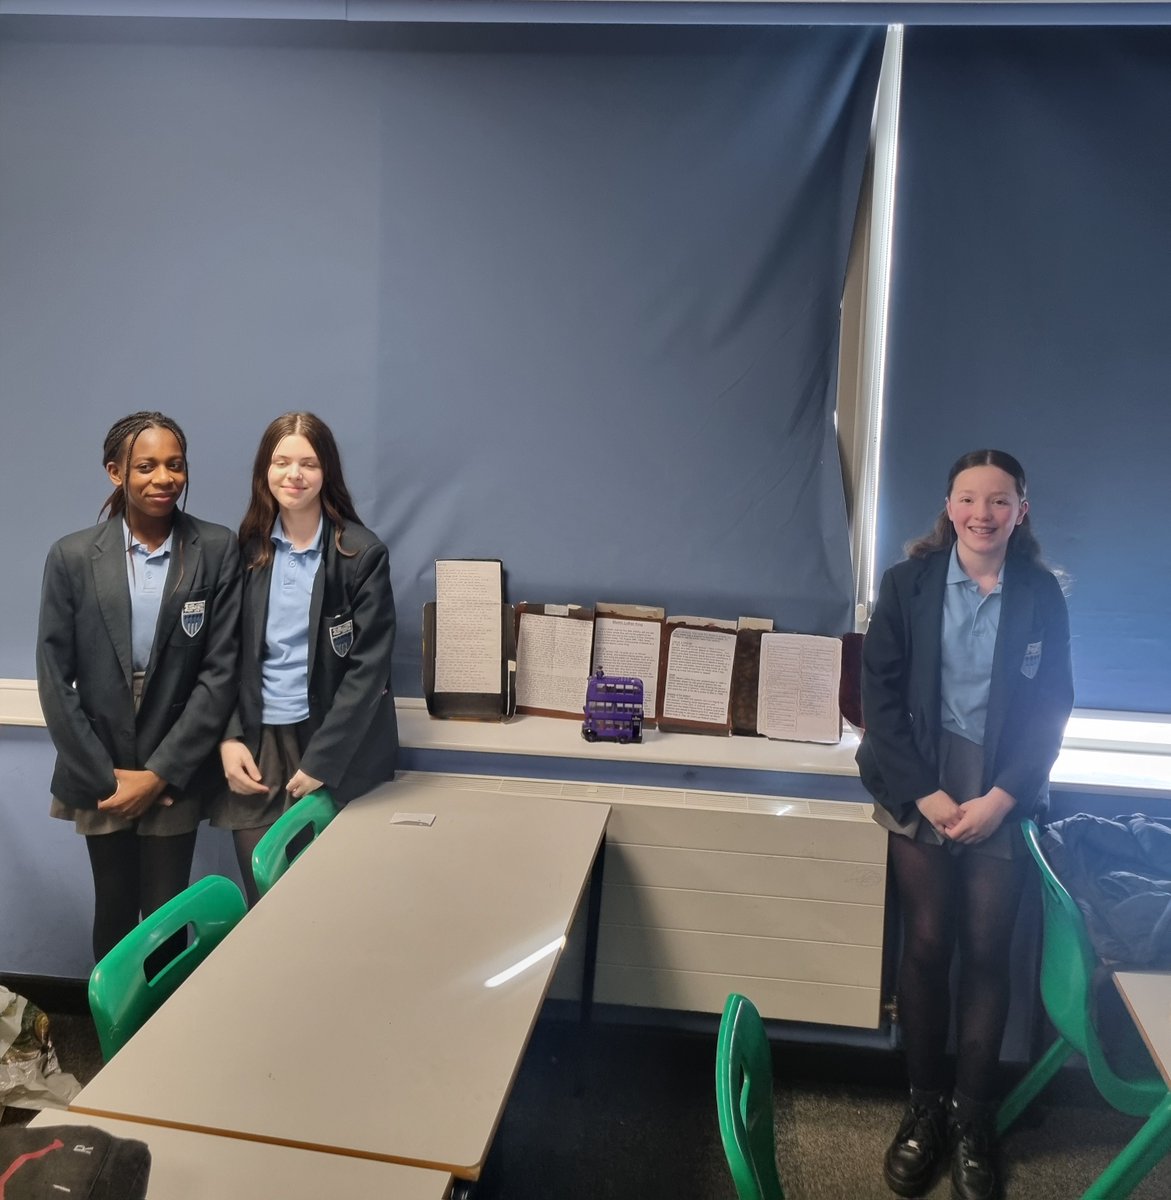 Our History Scholars presented their work on the question of Is Protest Necessary For Change at lunchtime today. Incredibly well researched and presented work. Well done scholars! #research #oracy #democracy